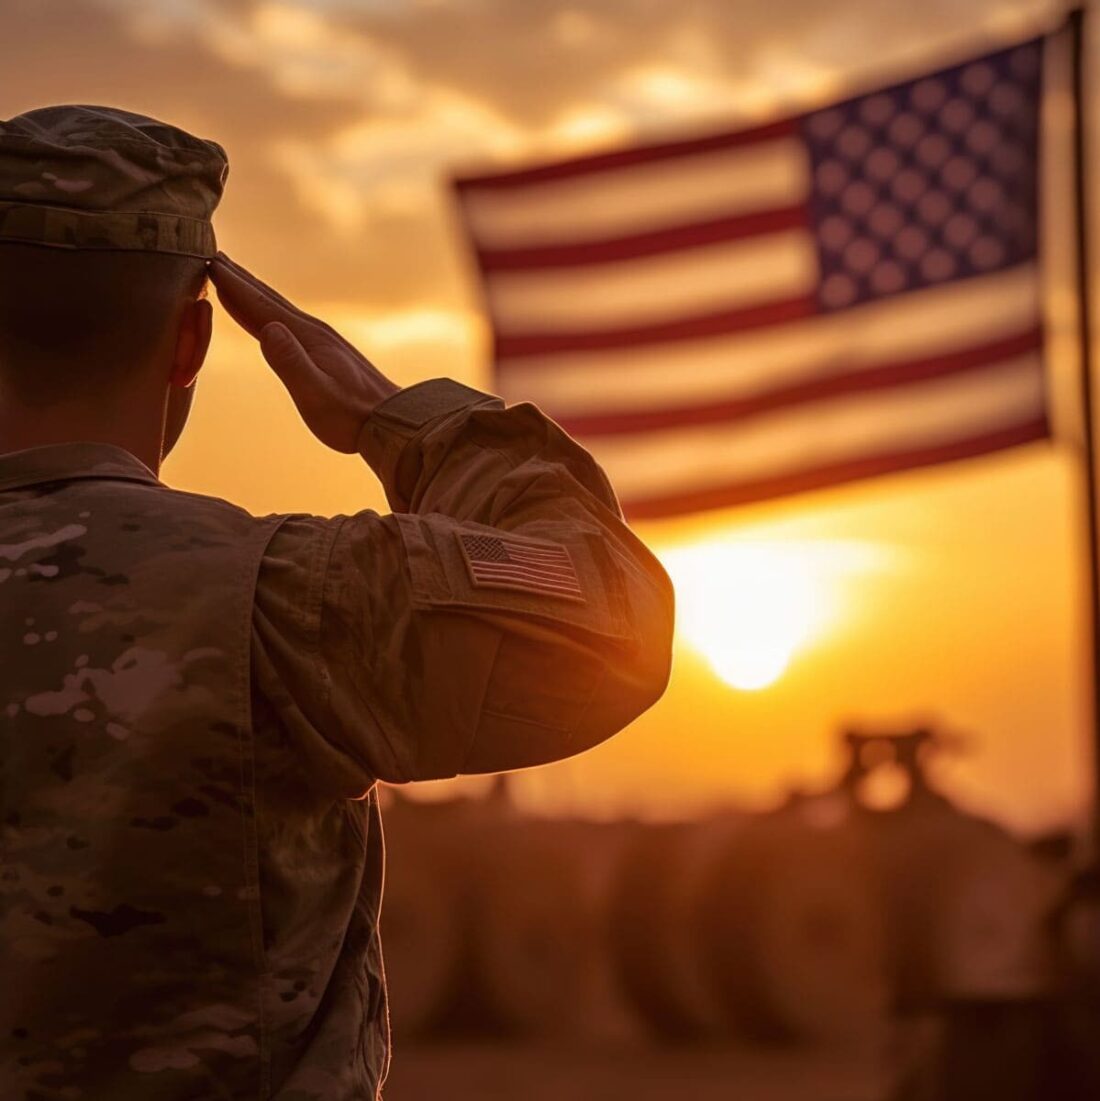 Soldier saluting a flag during while the sun goes down.